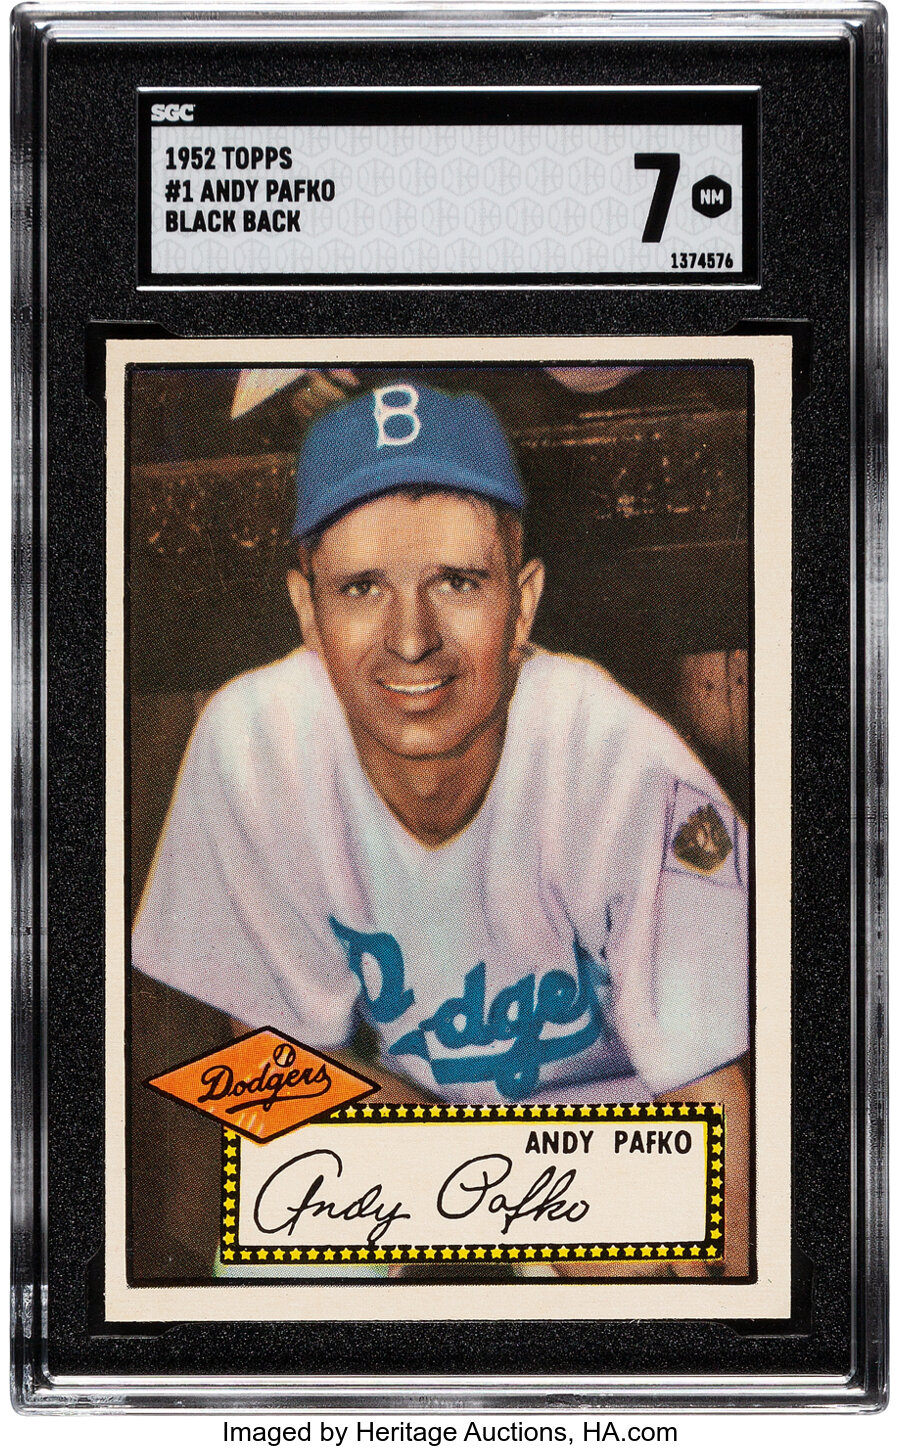 1952 Topps Andy Pafko (Black Back) #1 SGC NM 7 - Only Two Higher